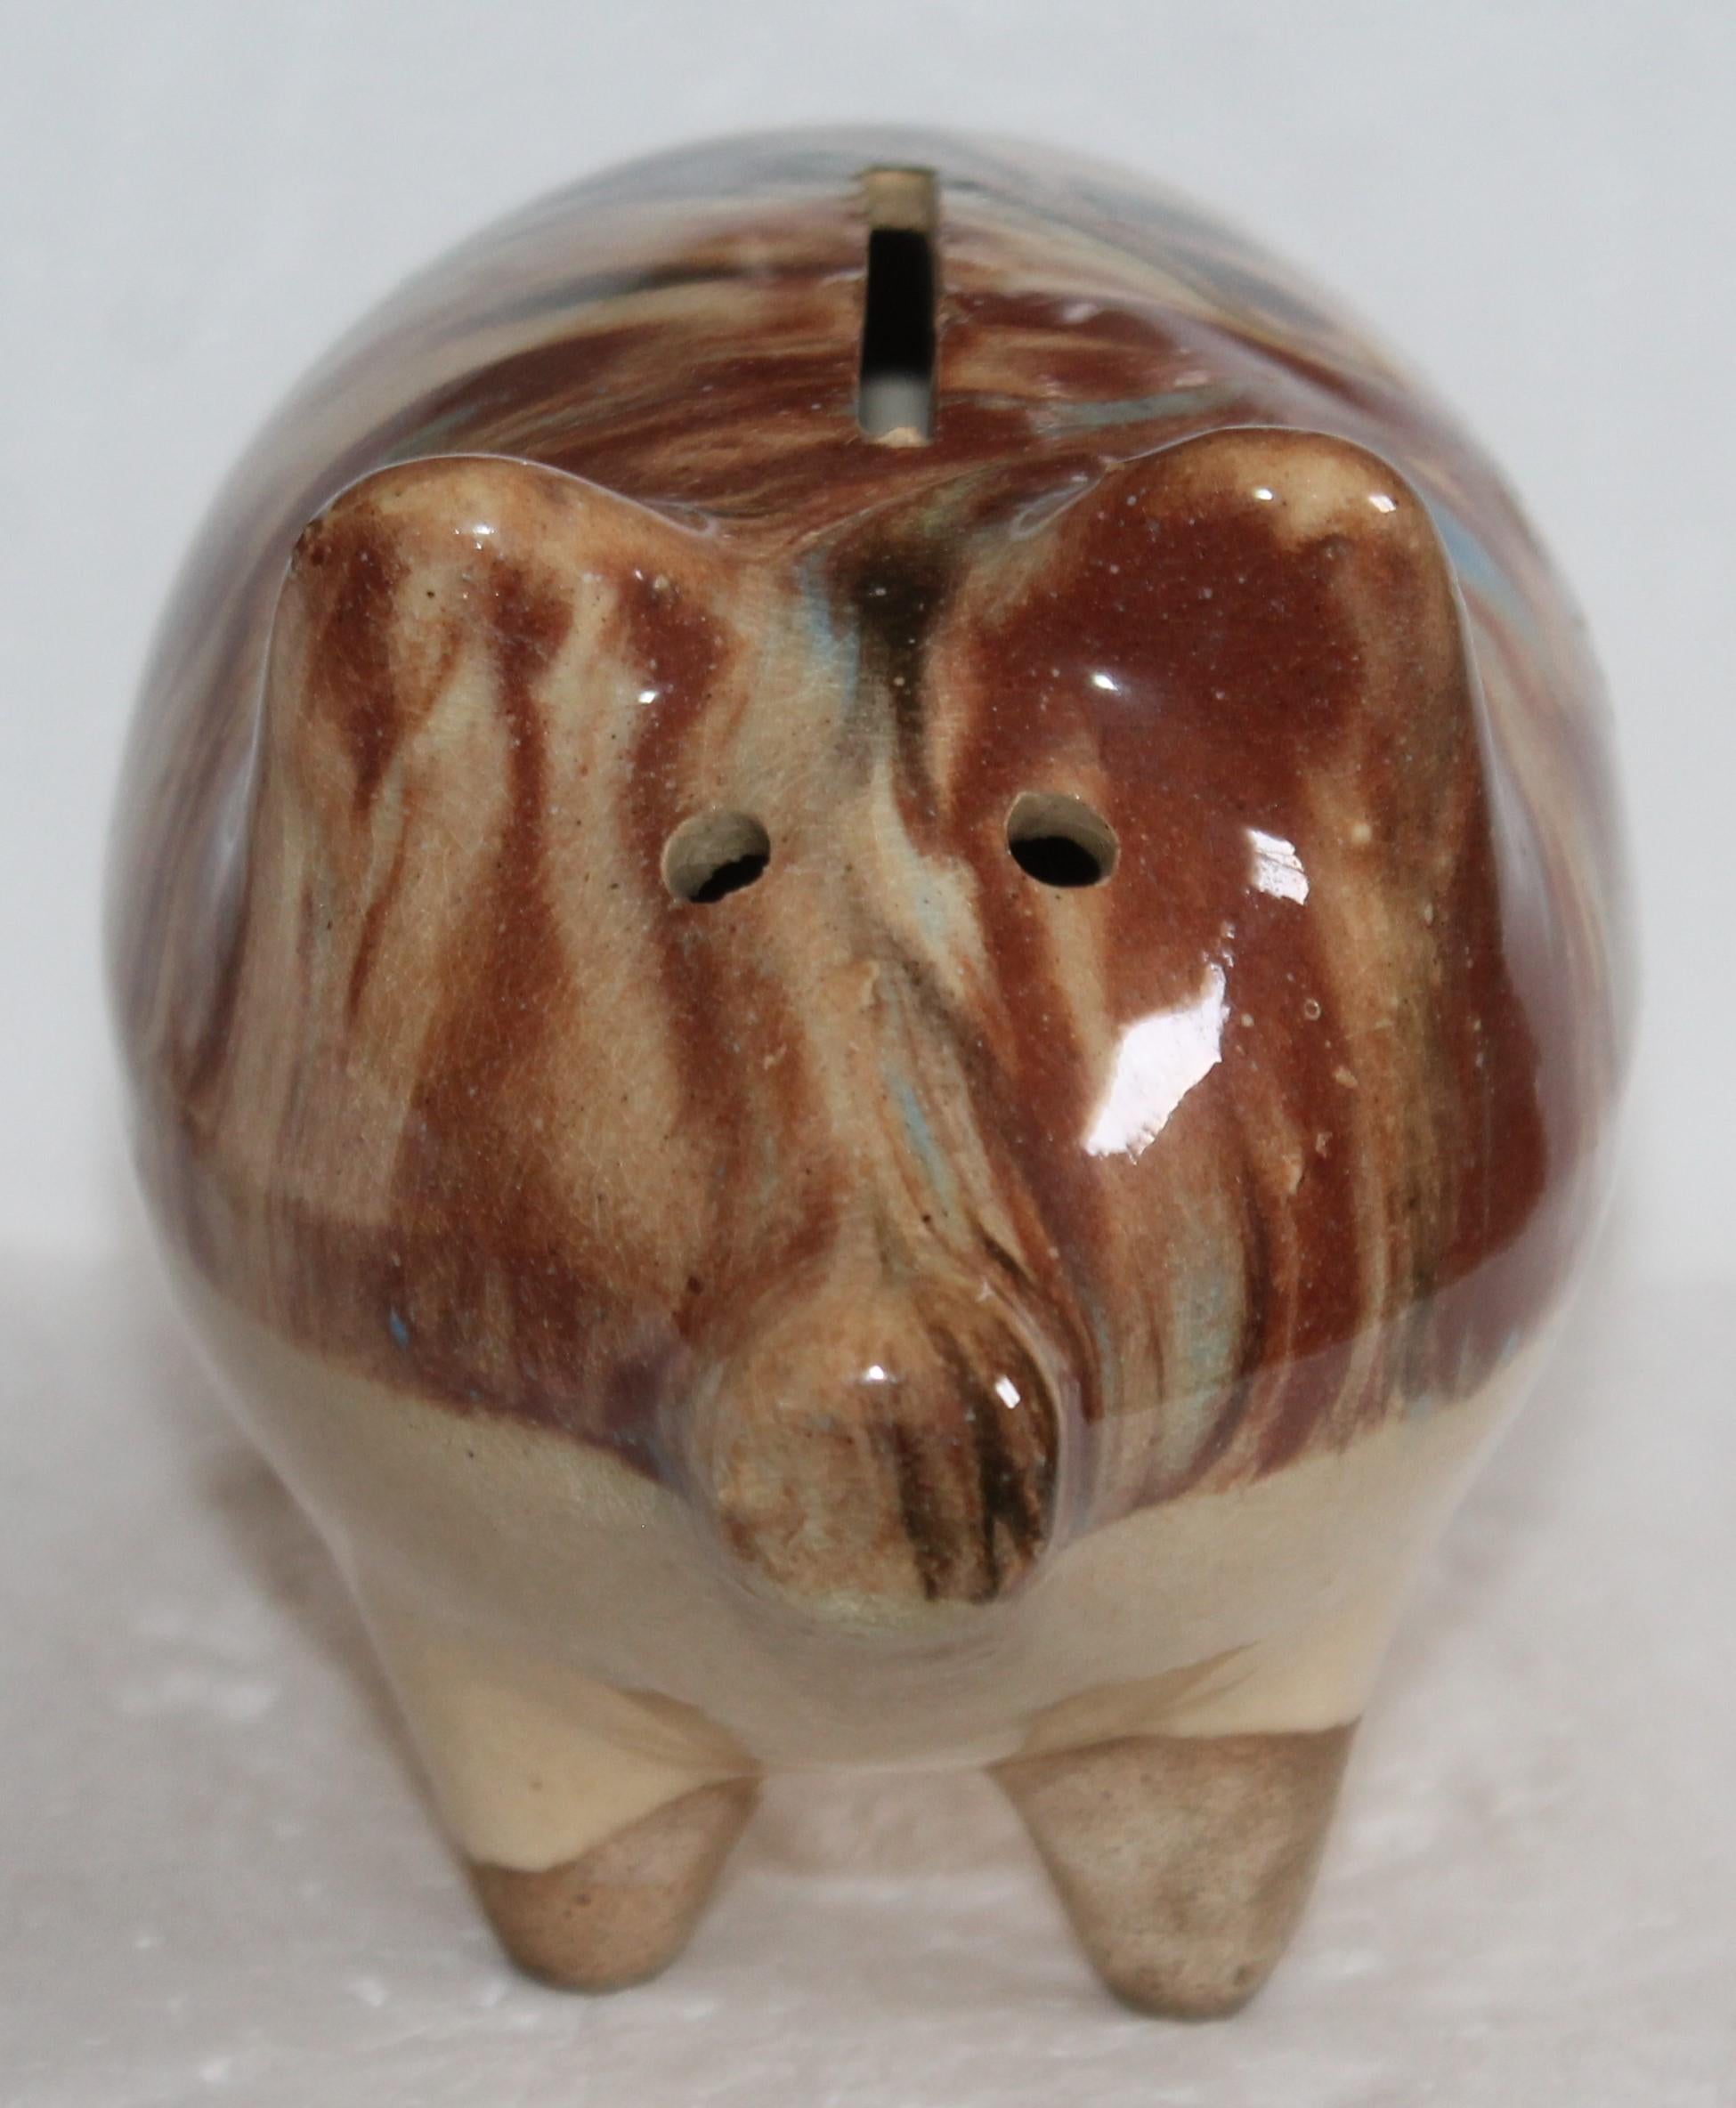 This is a very early stone ware glazed piggy bank from New England. This is a handmade piggy bank in very good condition.